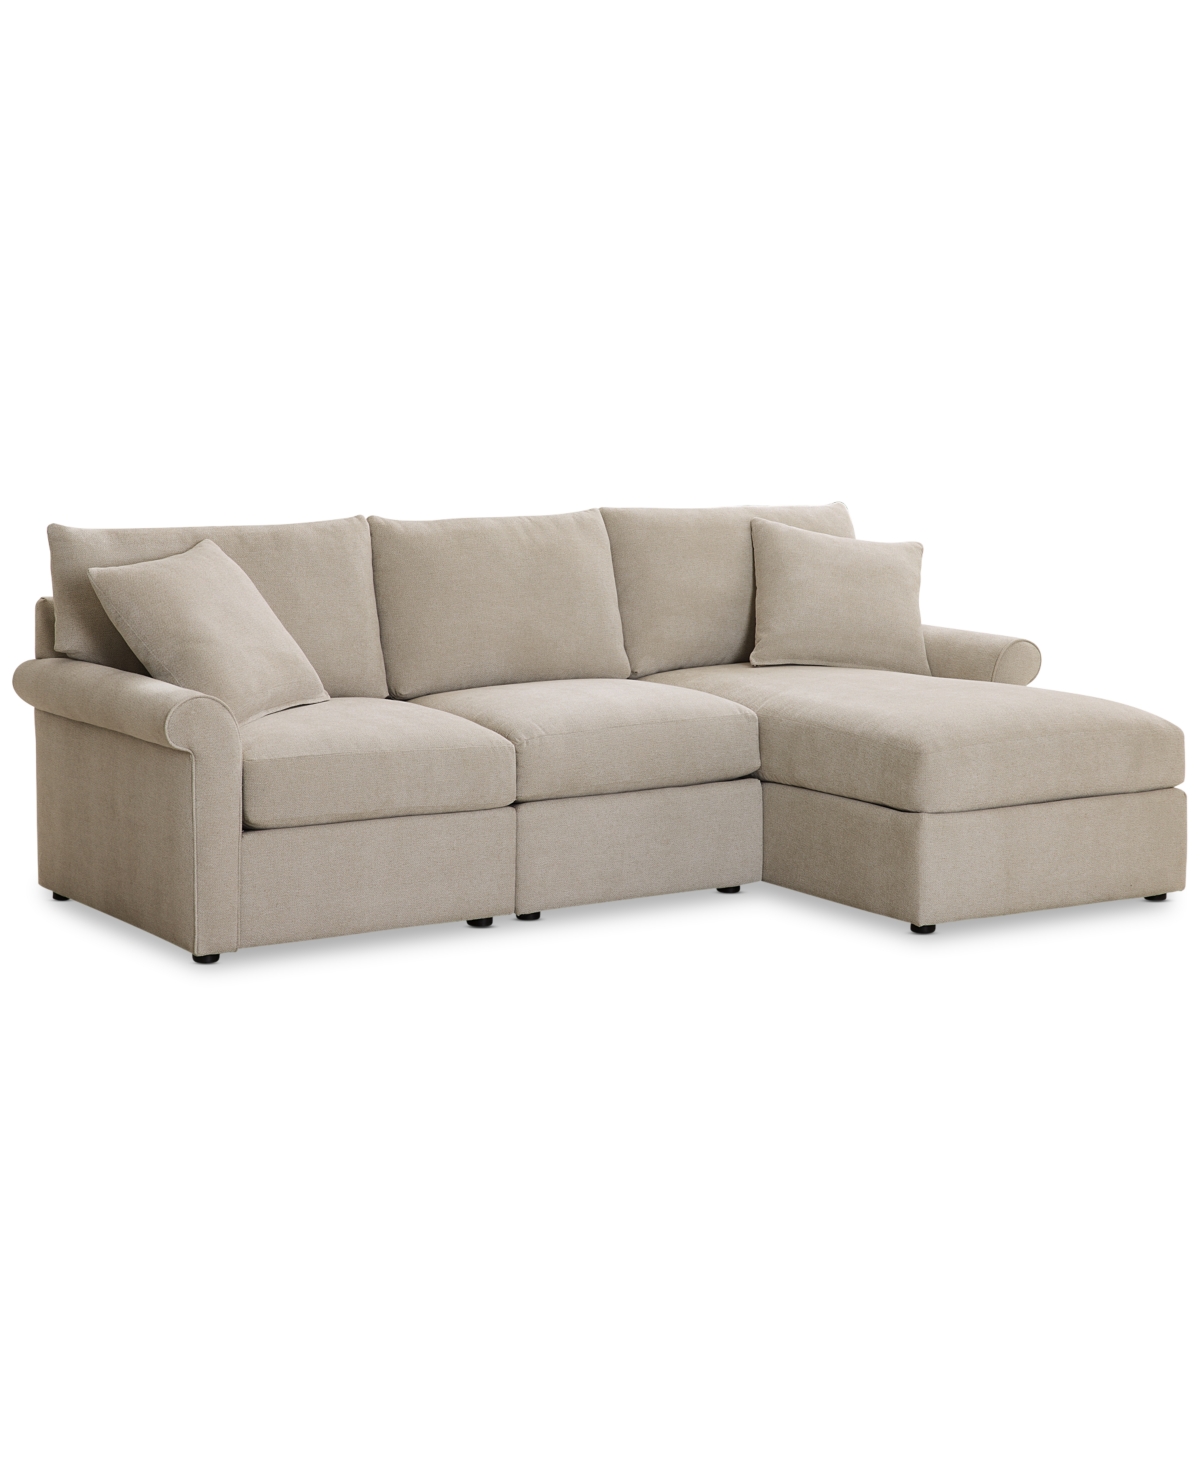 Furniture Wrenley 99" 3-pc. Fabric Modular Chaise Sectional Sofa, Created For Macy's In Dove